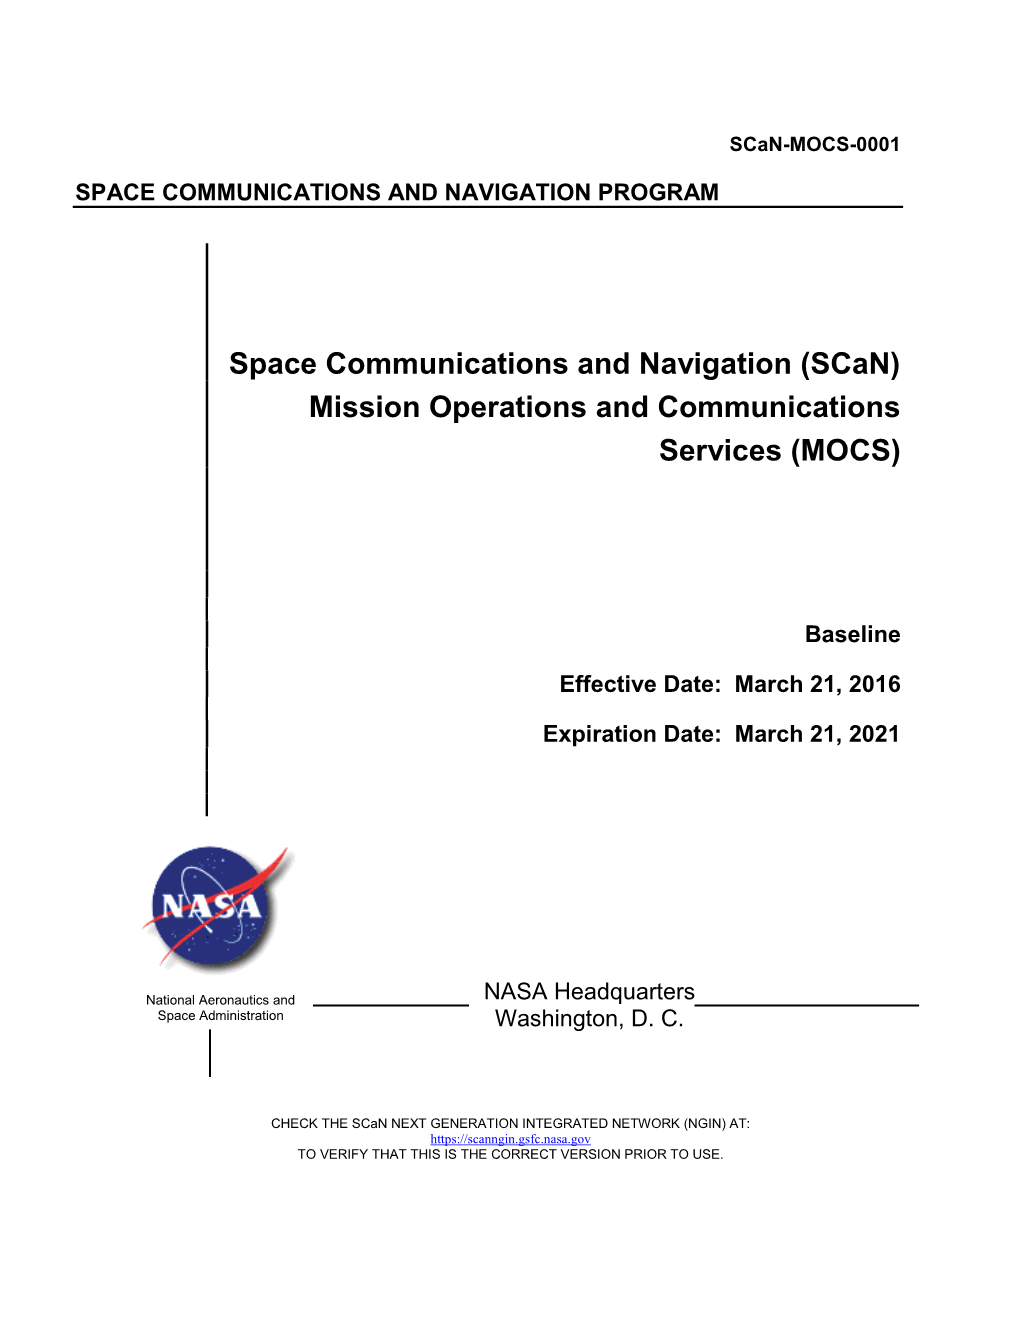 NASA's Mission Operations and Communications Services